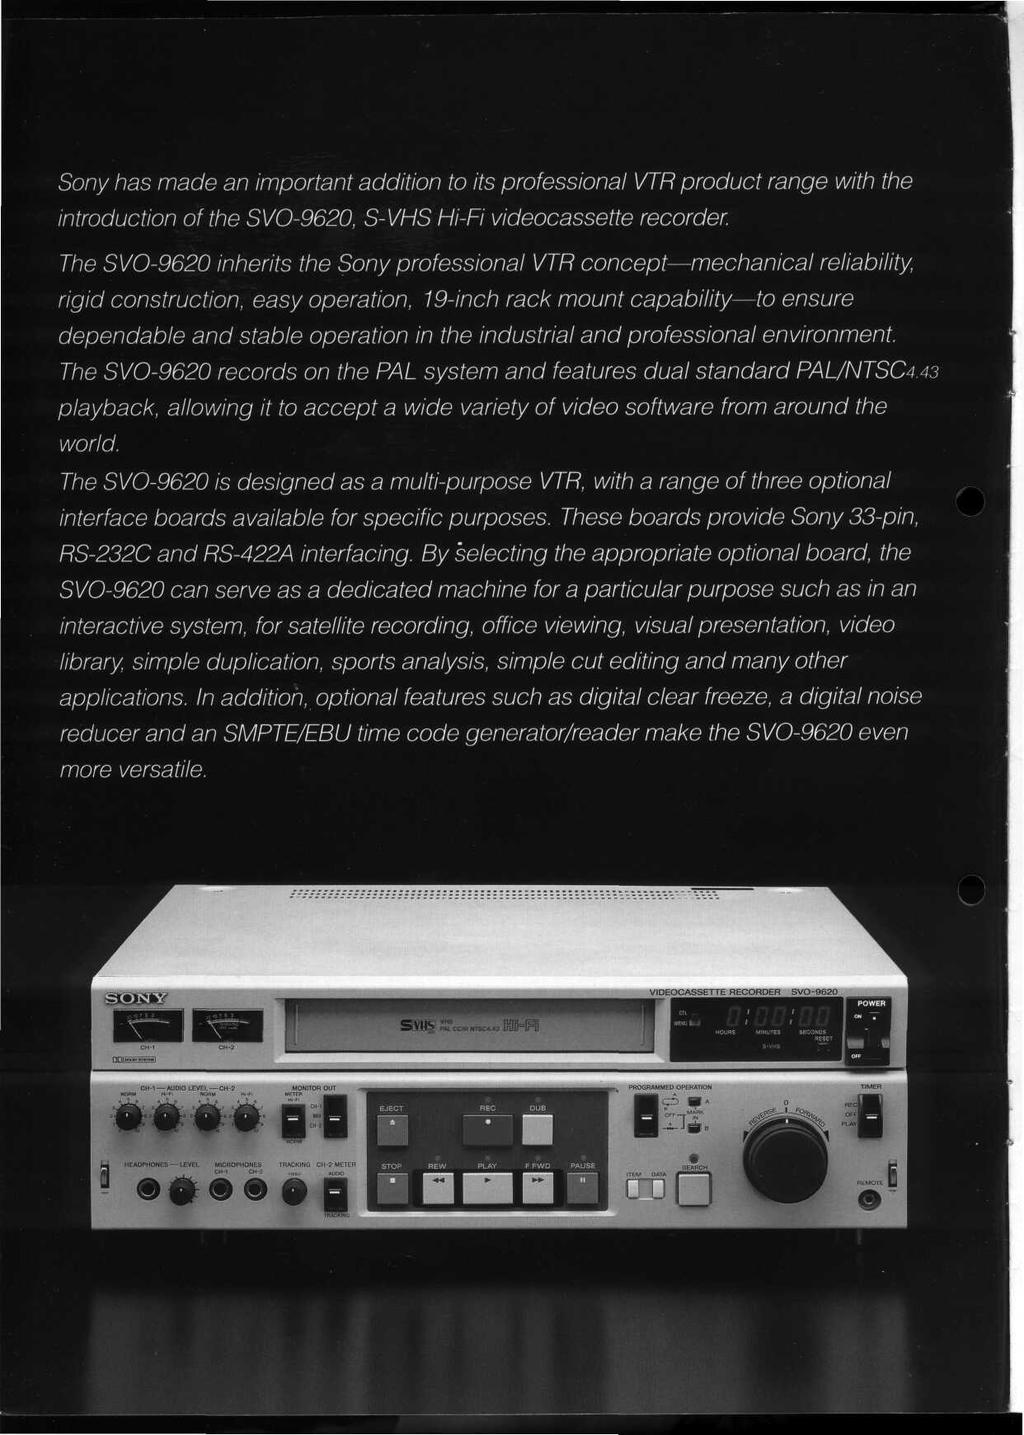 Sony nas made an important addition to its professional VTR product range with the introduction of the SVO-9620, S-VHS Hi-Fi videocassette recorder.